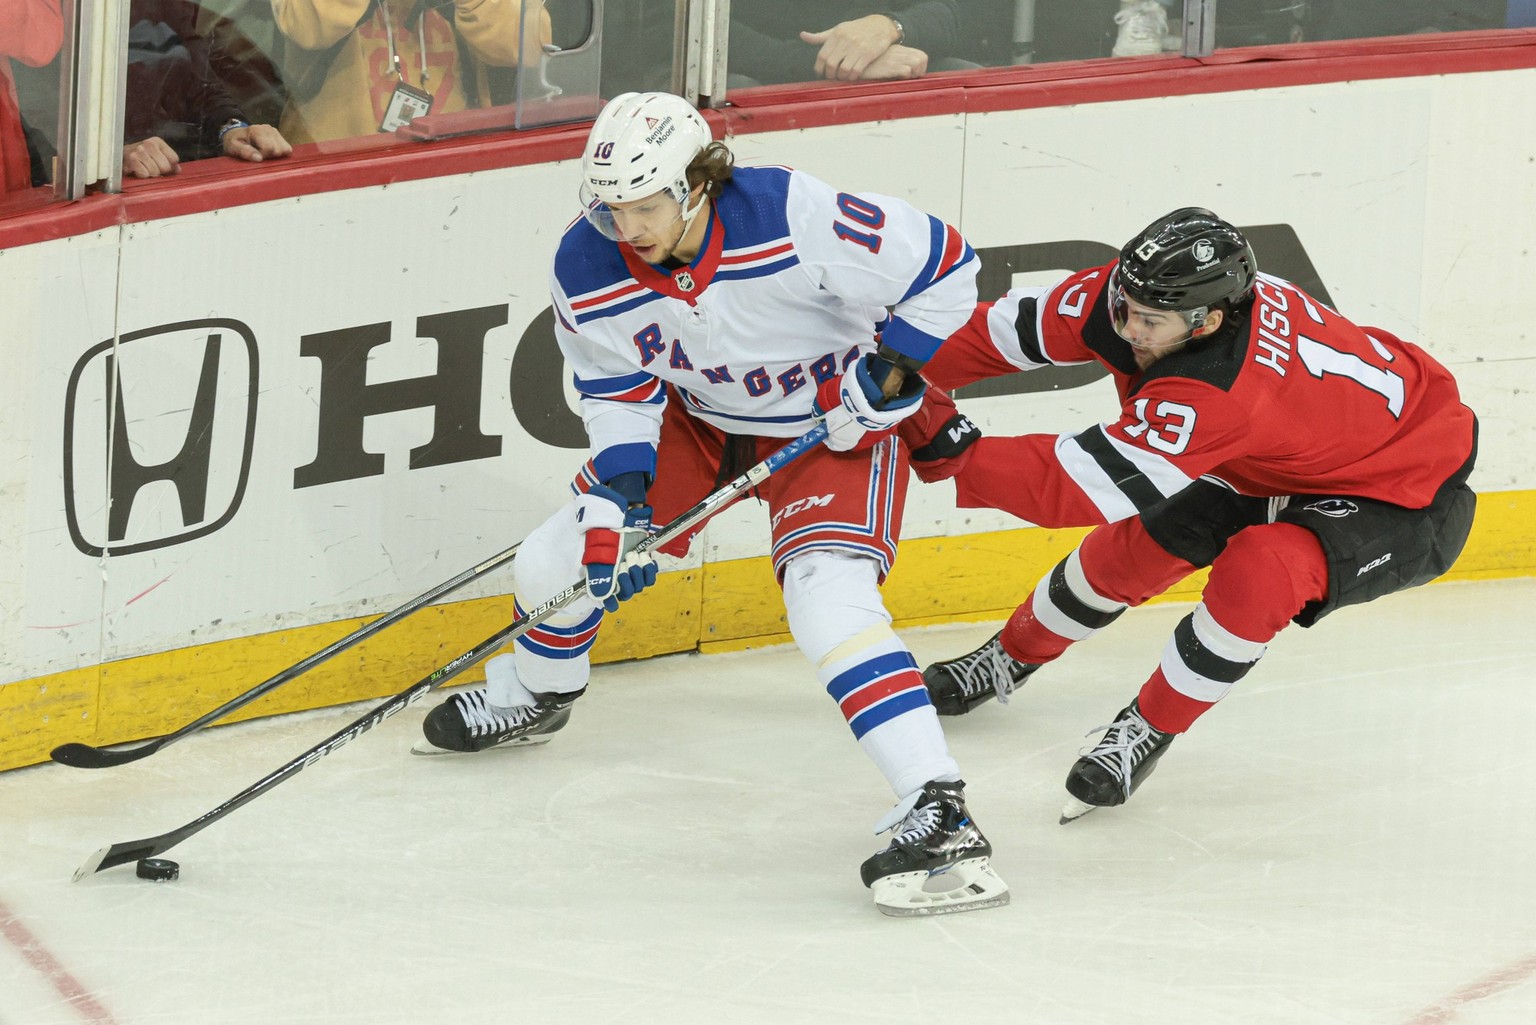 NHL, Eishockey Herren, USA Stanley Cup Playoffs-New York Rangers at New Jersey Devils May 1, 2023 Newark, New Jersey, USA New York Rangers left wing Artemi Panarin 10 plays the puck against New Jersey ...